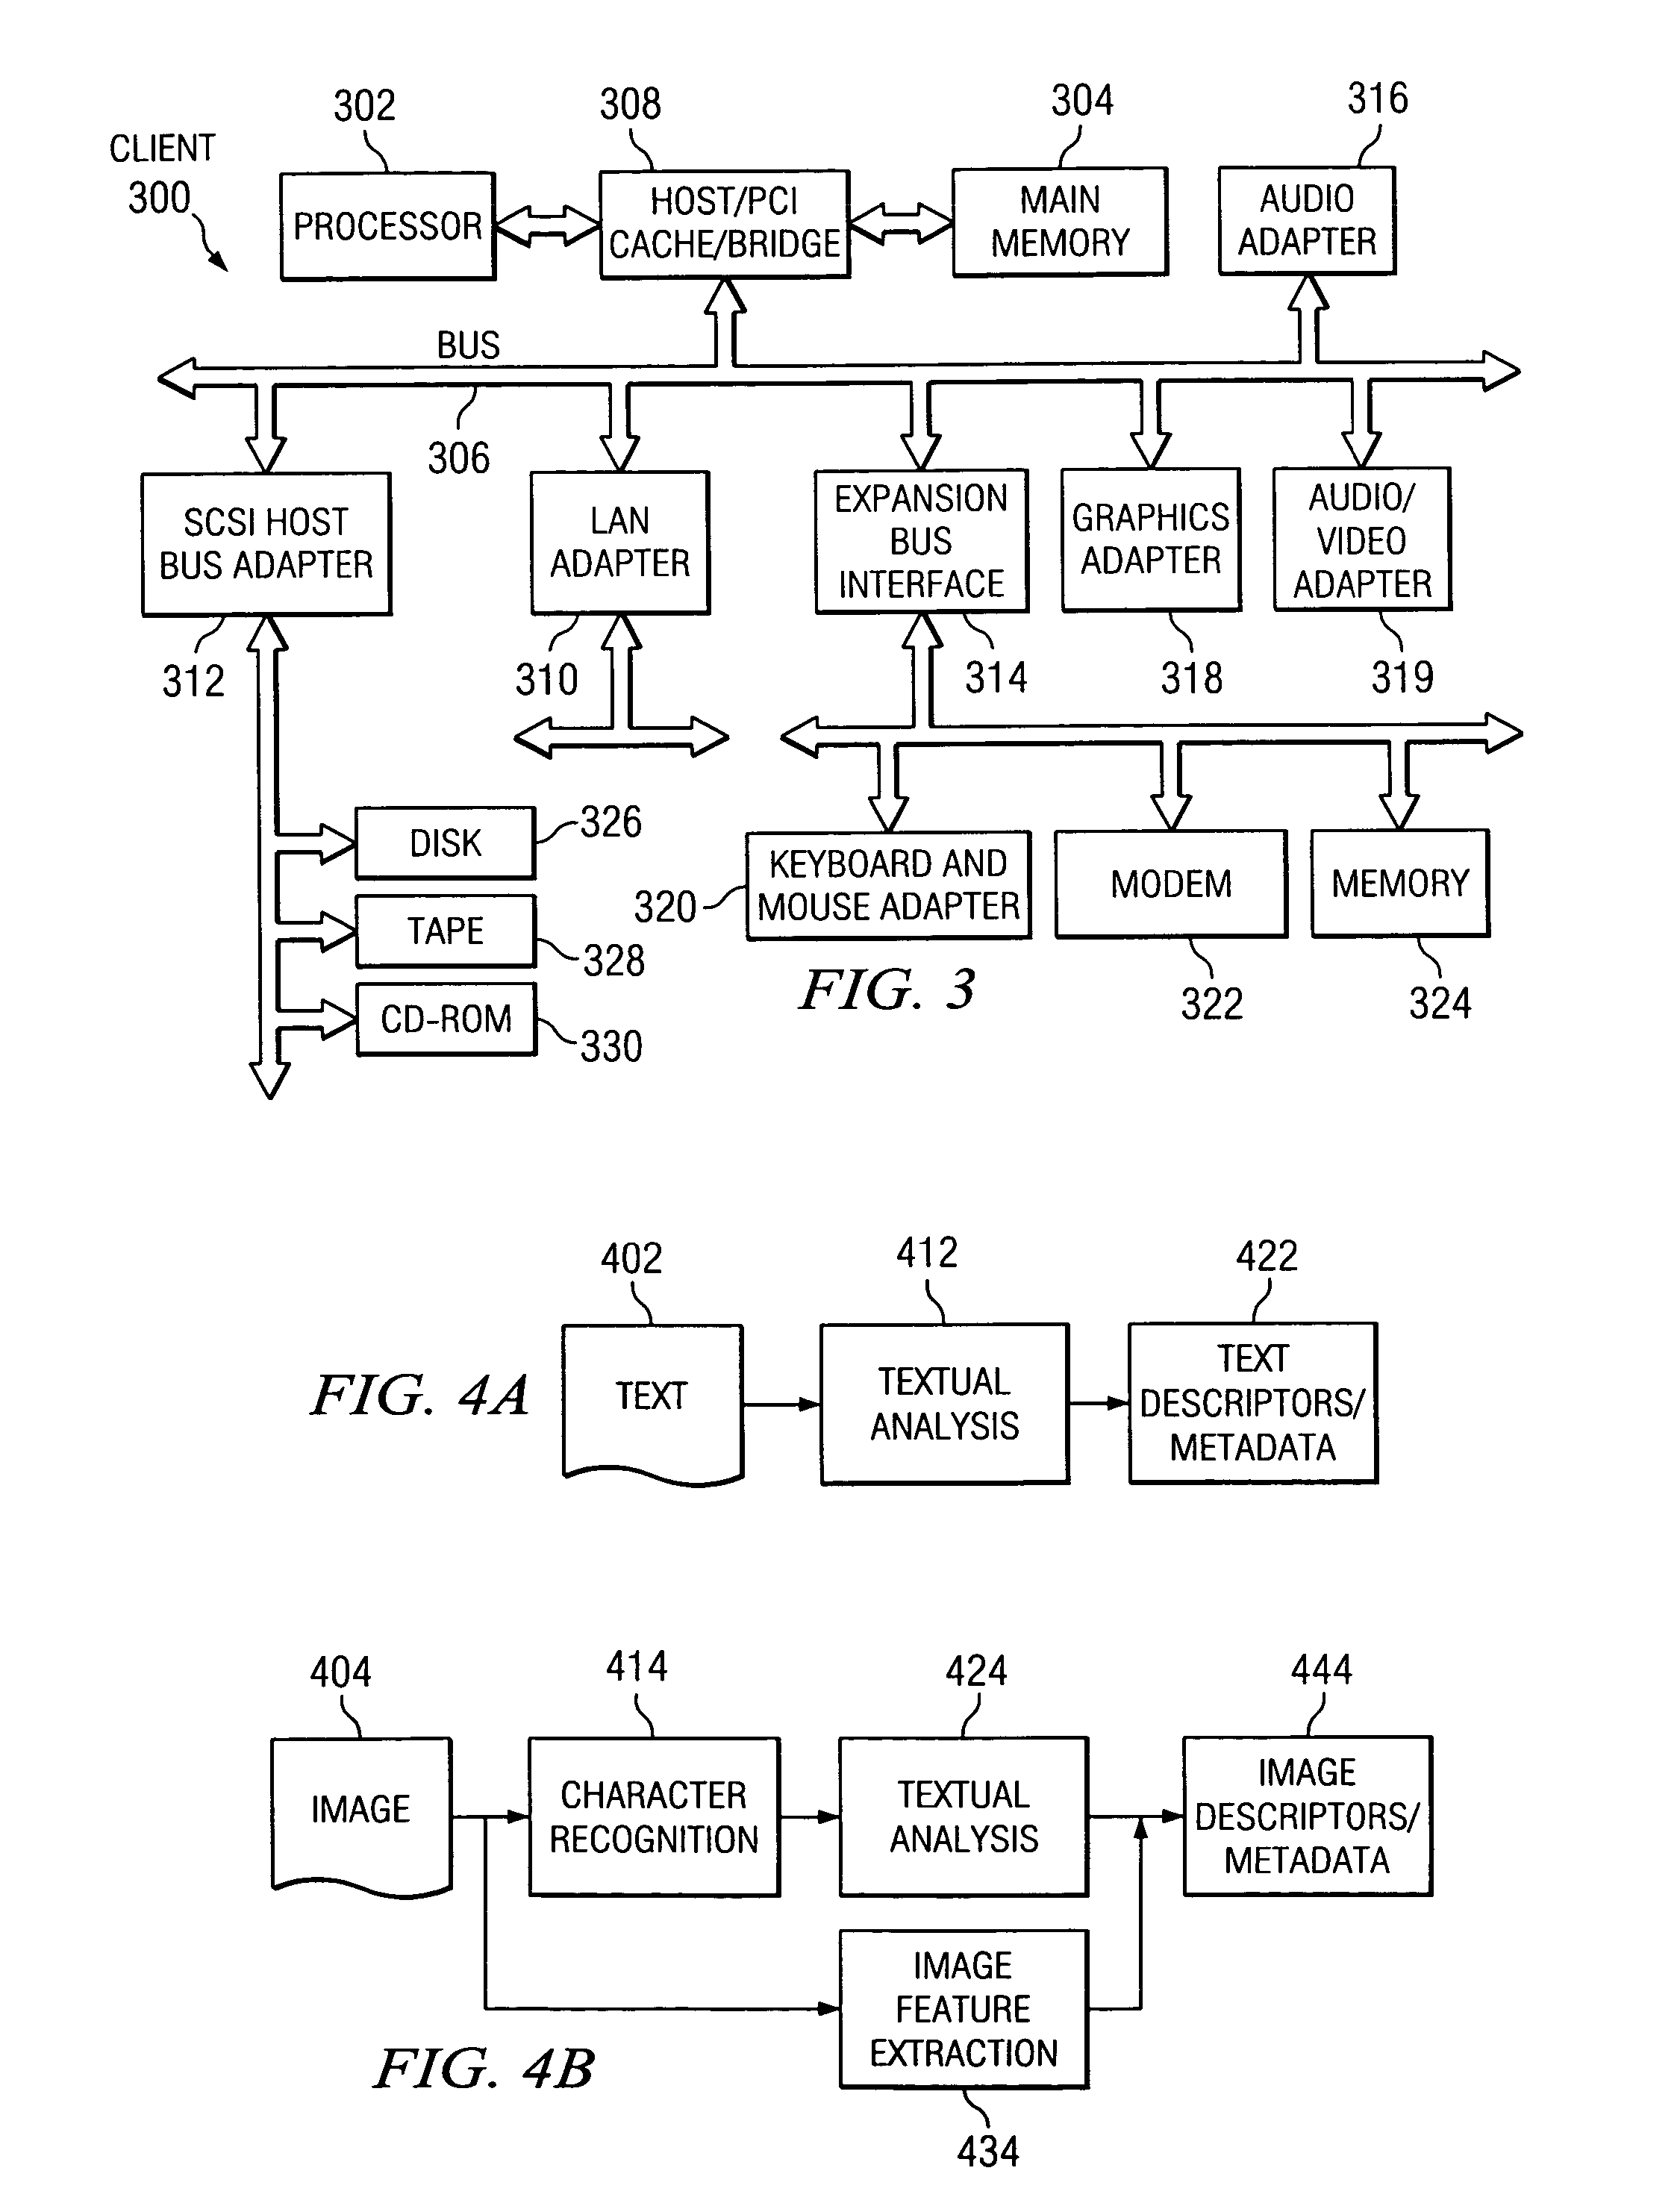 Method, apparatus, and program for cross-linking information sources using multiple modalities